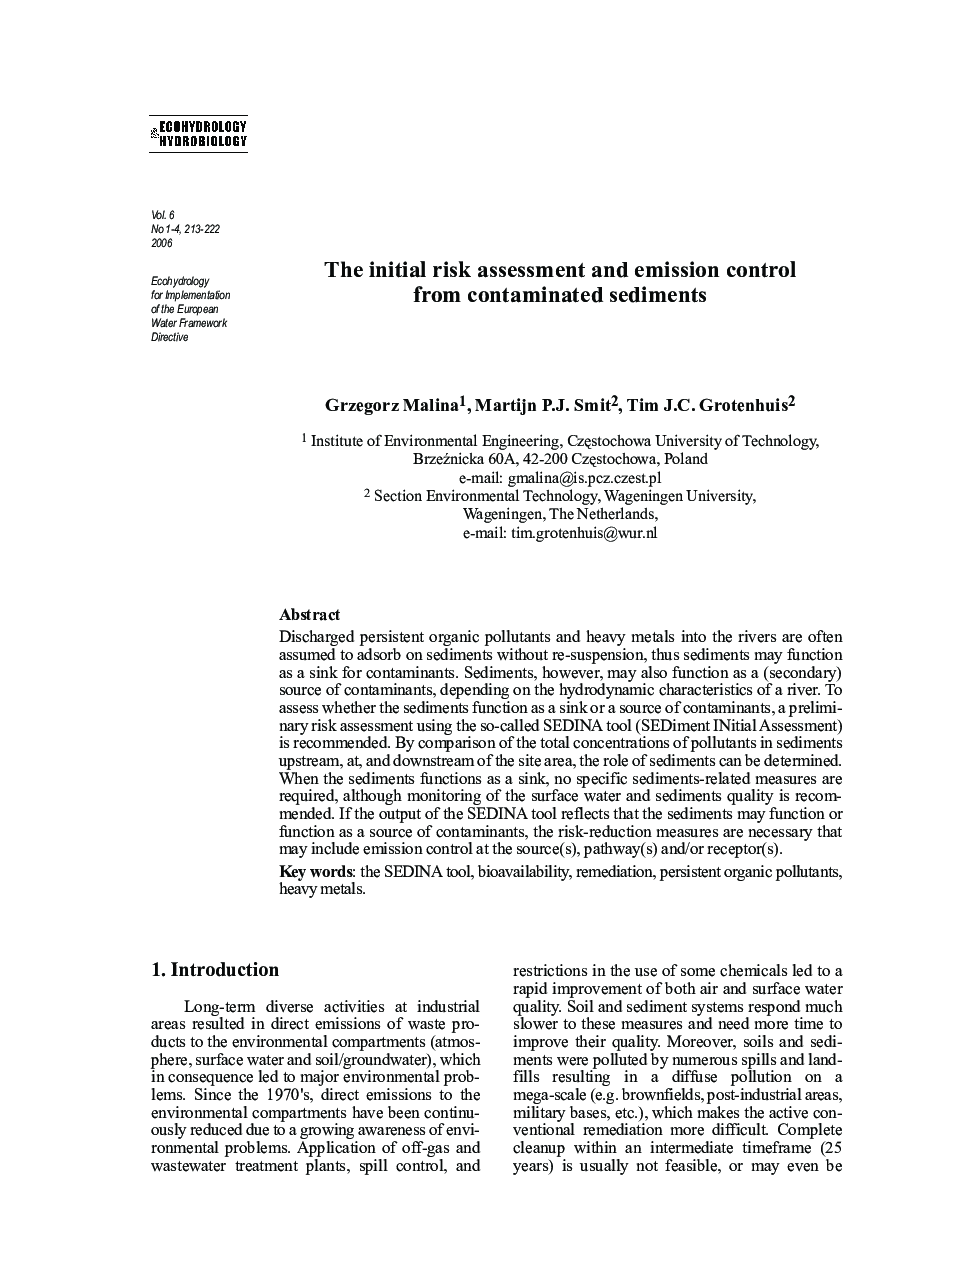 The initial risk assessment and emission control from contaminated sediments